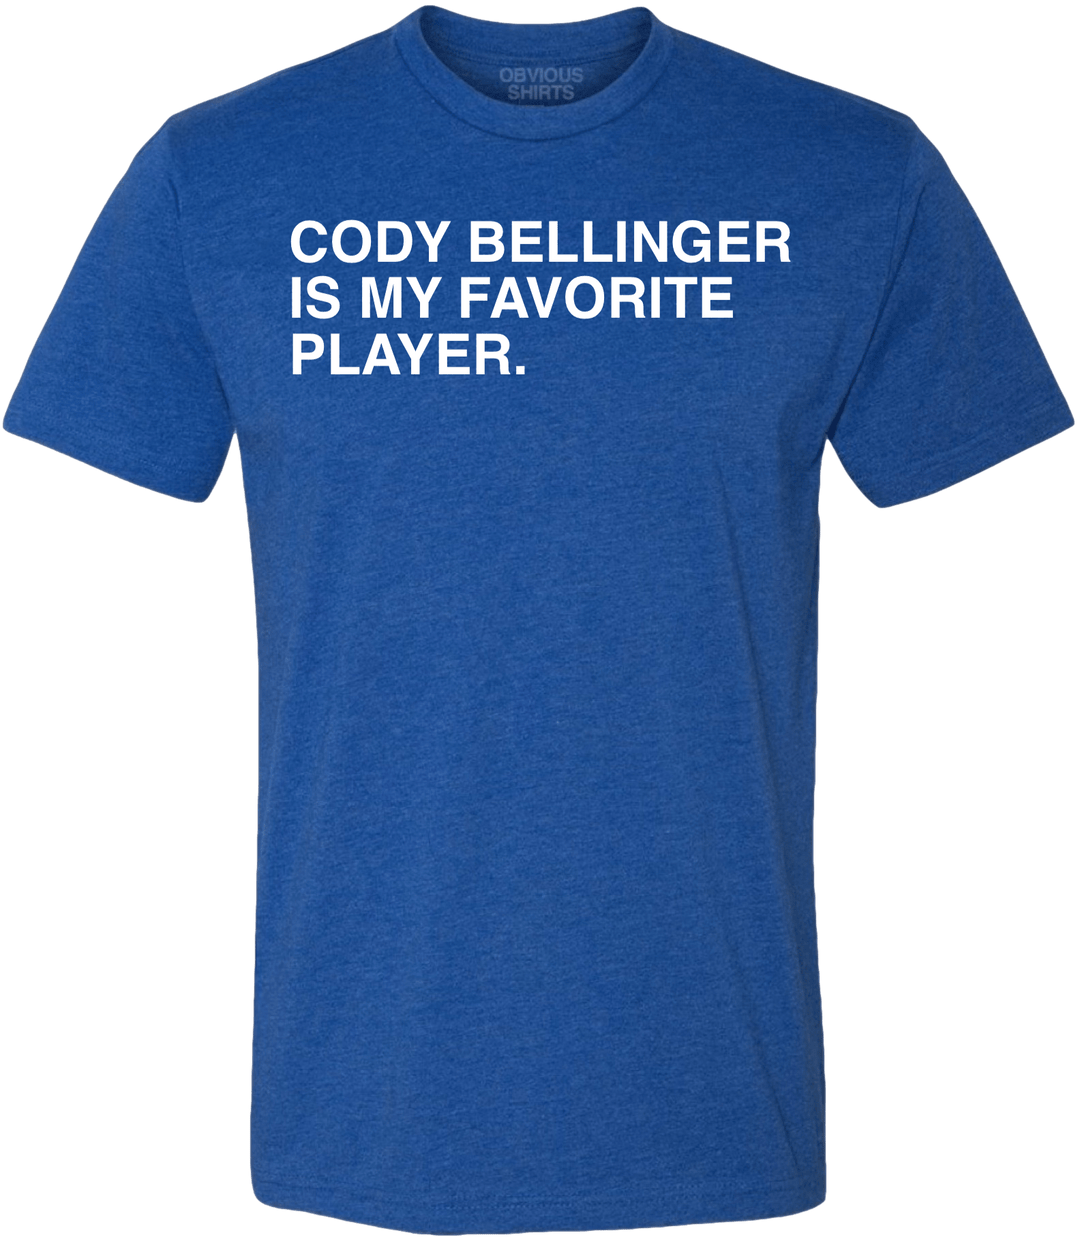 CODY BELLINGER IS MY FAVORITE PLAYER. - OBVIOUS SHIRTS